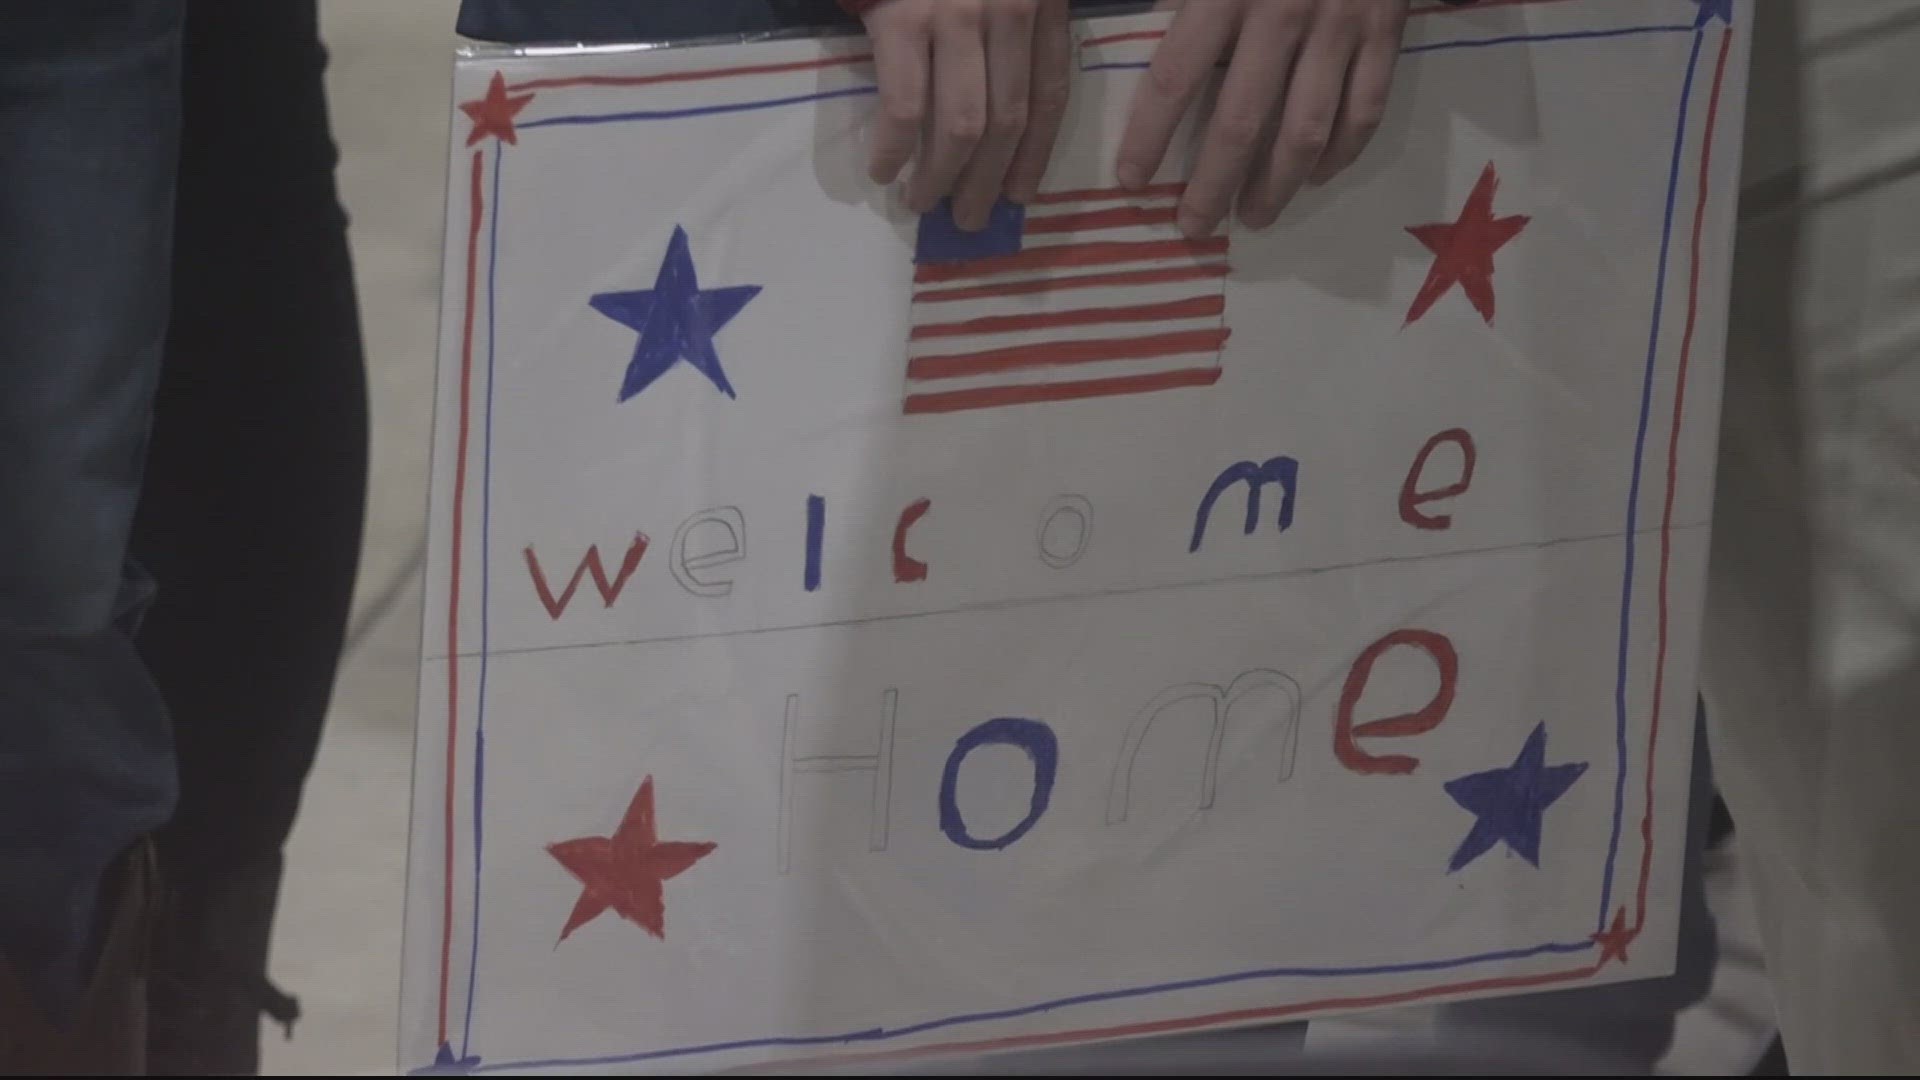 About 50 veterans had a warm welcome home to the Shenandoah Valley.